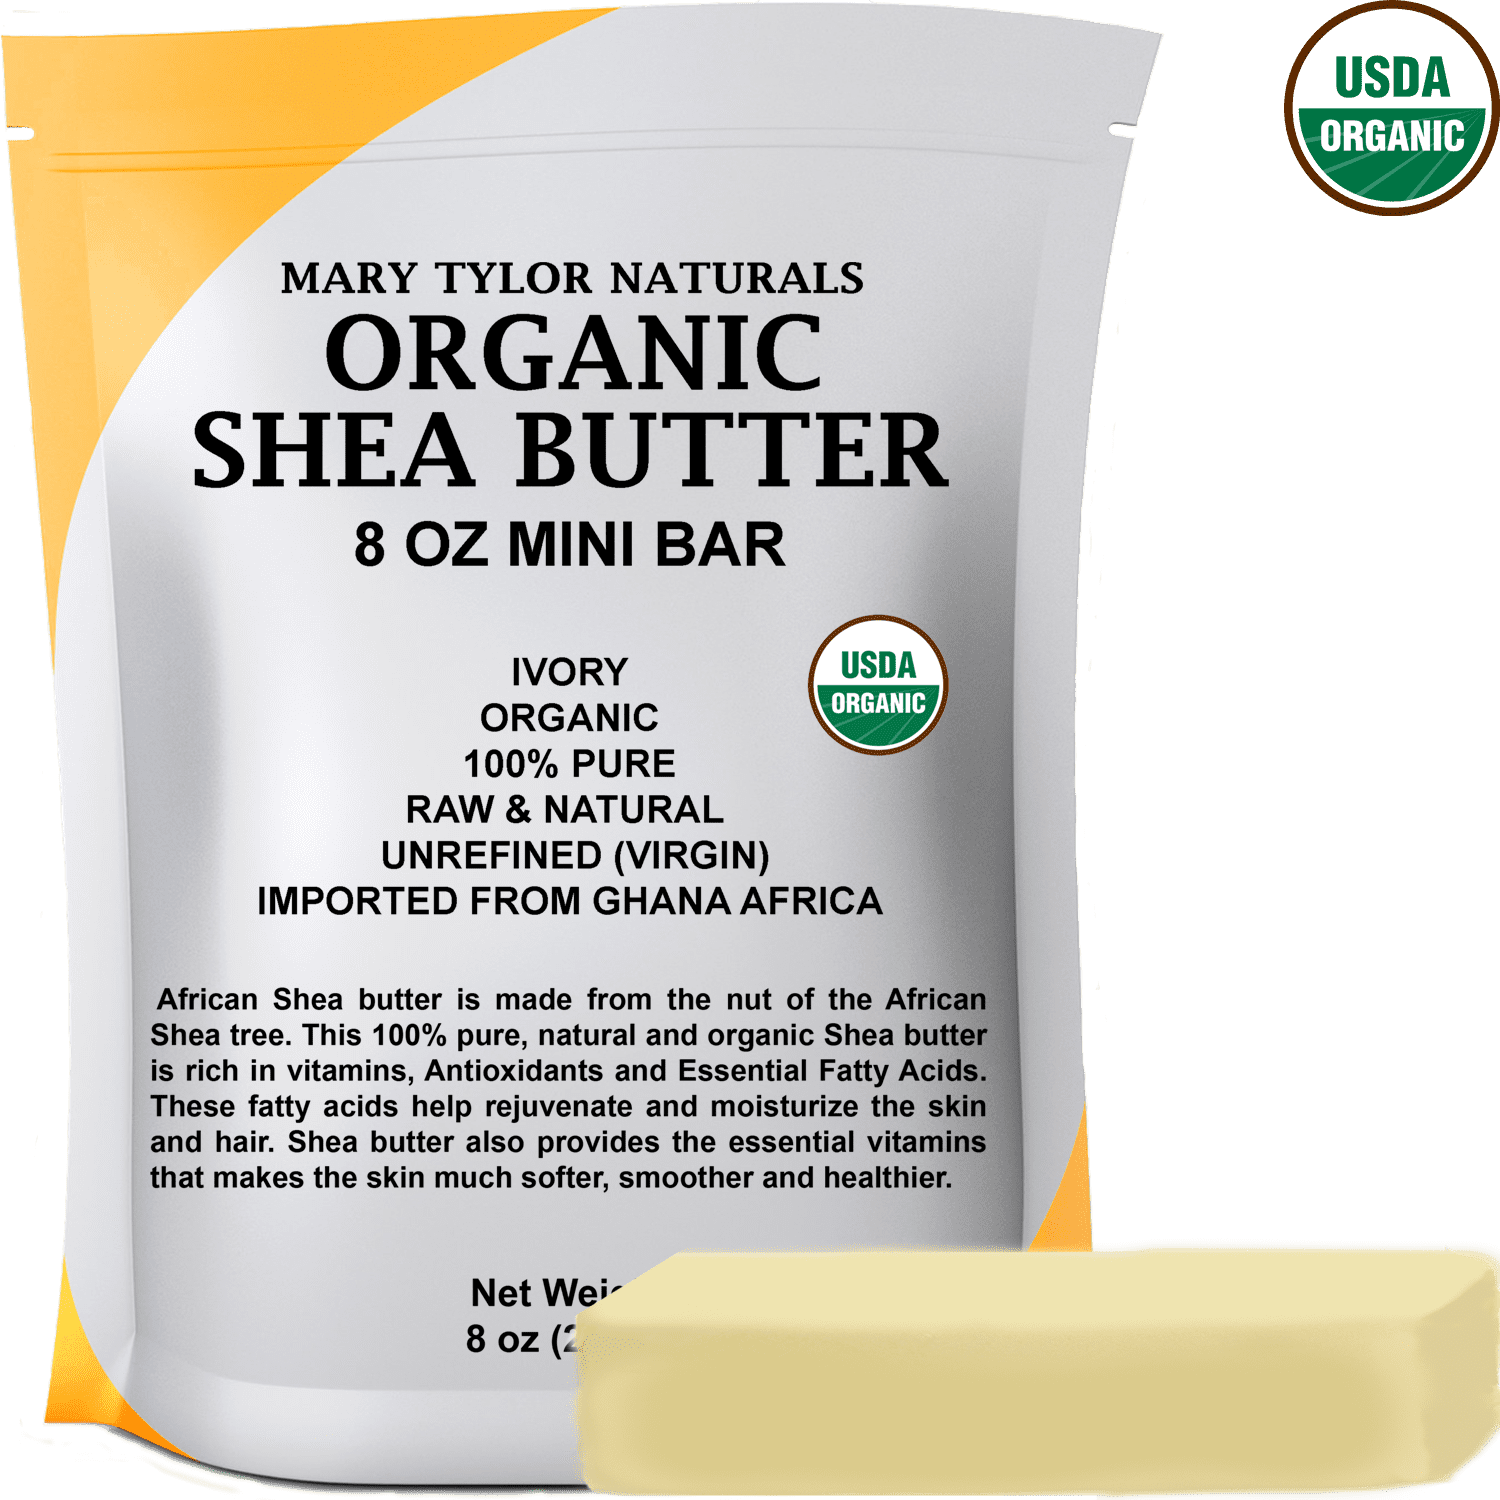 Sheanefit Raw Unrefined Ivory African Shea Butter Bulk Bar- Use Alone, Mix  with Other to Make Unique DIY Body Butter, Ivory Bulk Block Bars (10